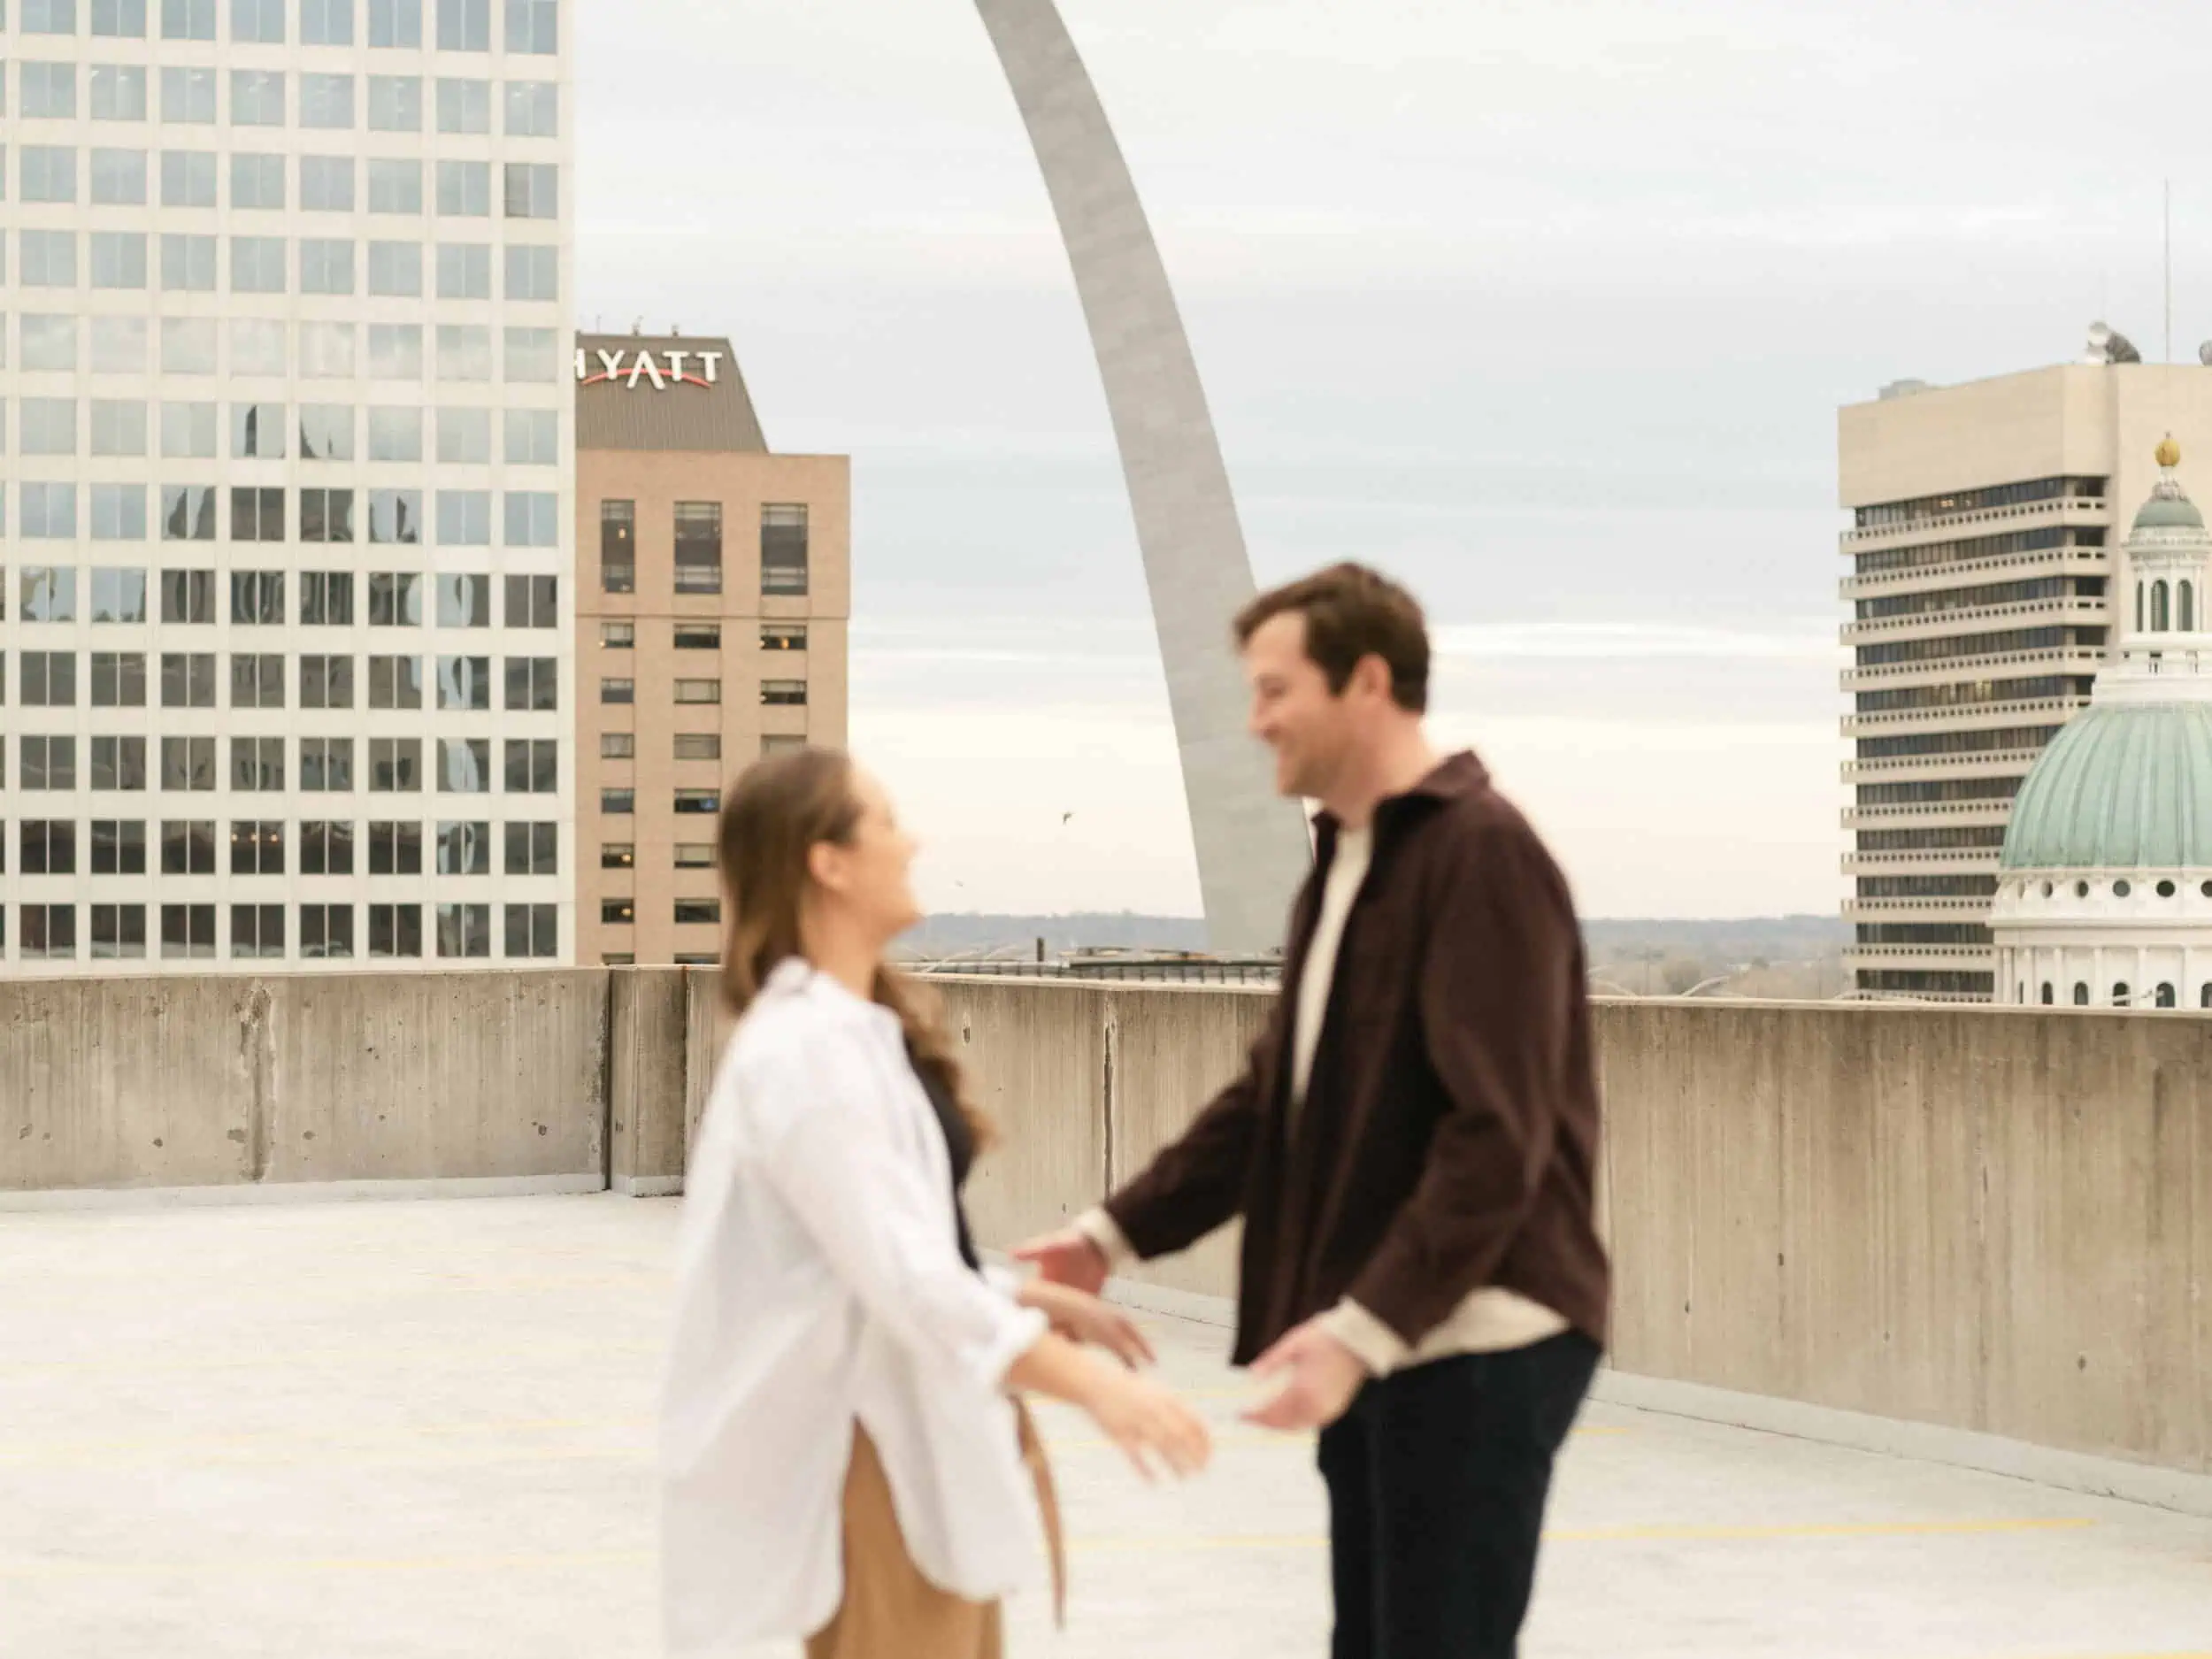 A couple laughing on an urban rooftop in Downtown Saint Louis, Missouri with the Arch in the background, shot with a documentary style by Stacey Vandas Photography.